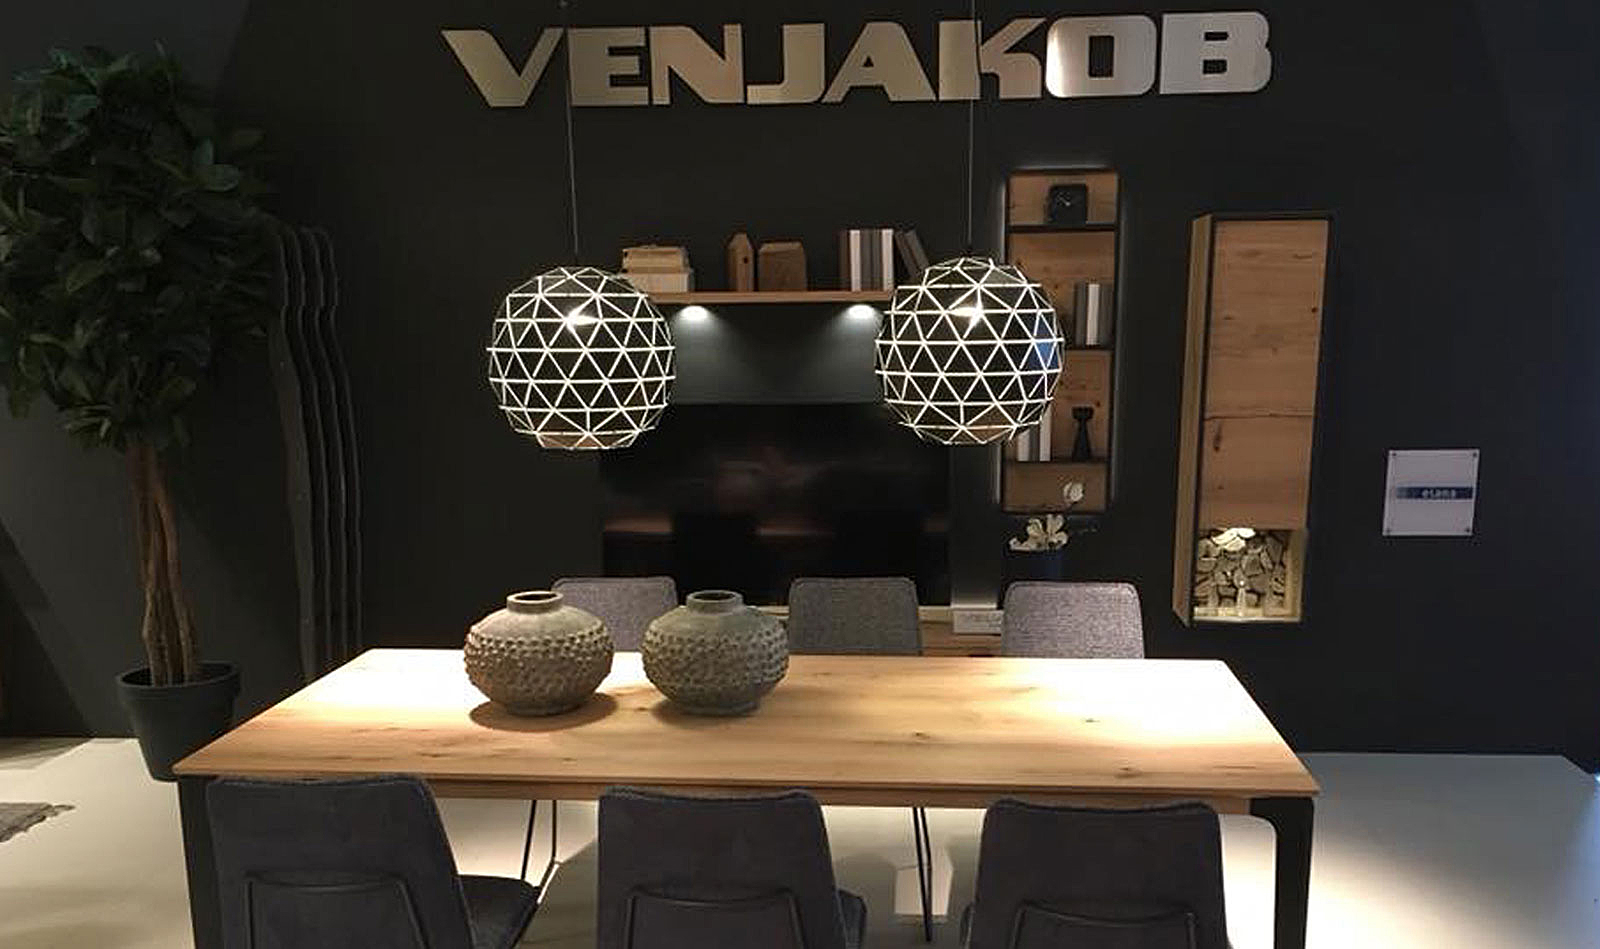 Salone del Mobile: Venjakob says thank you.